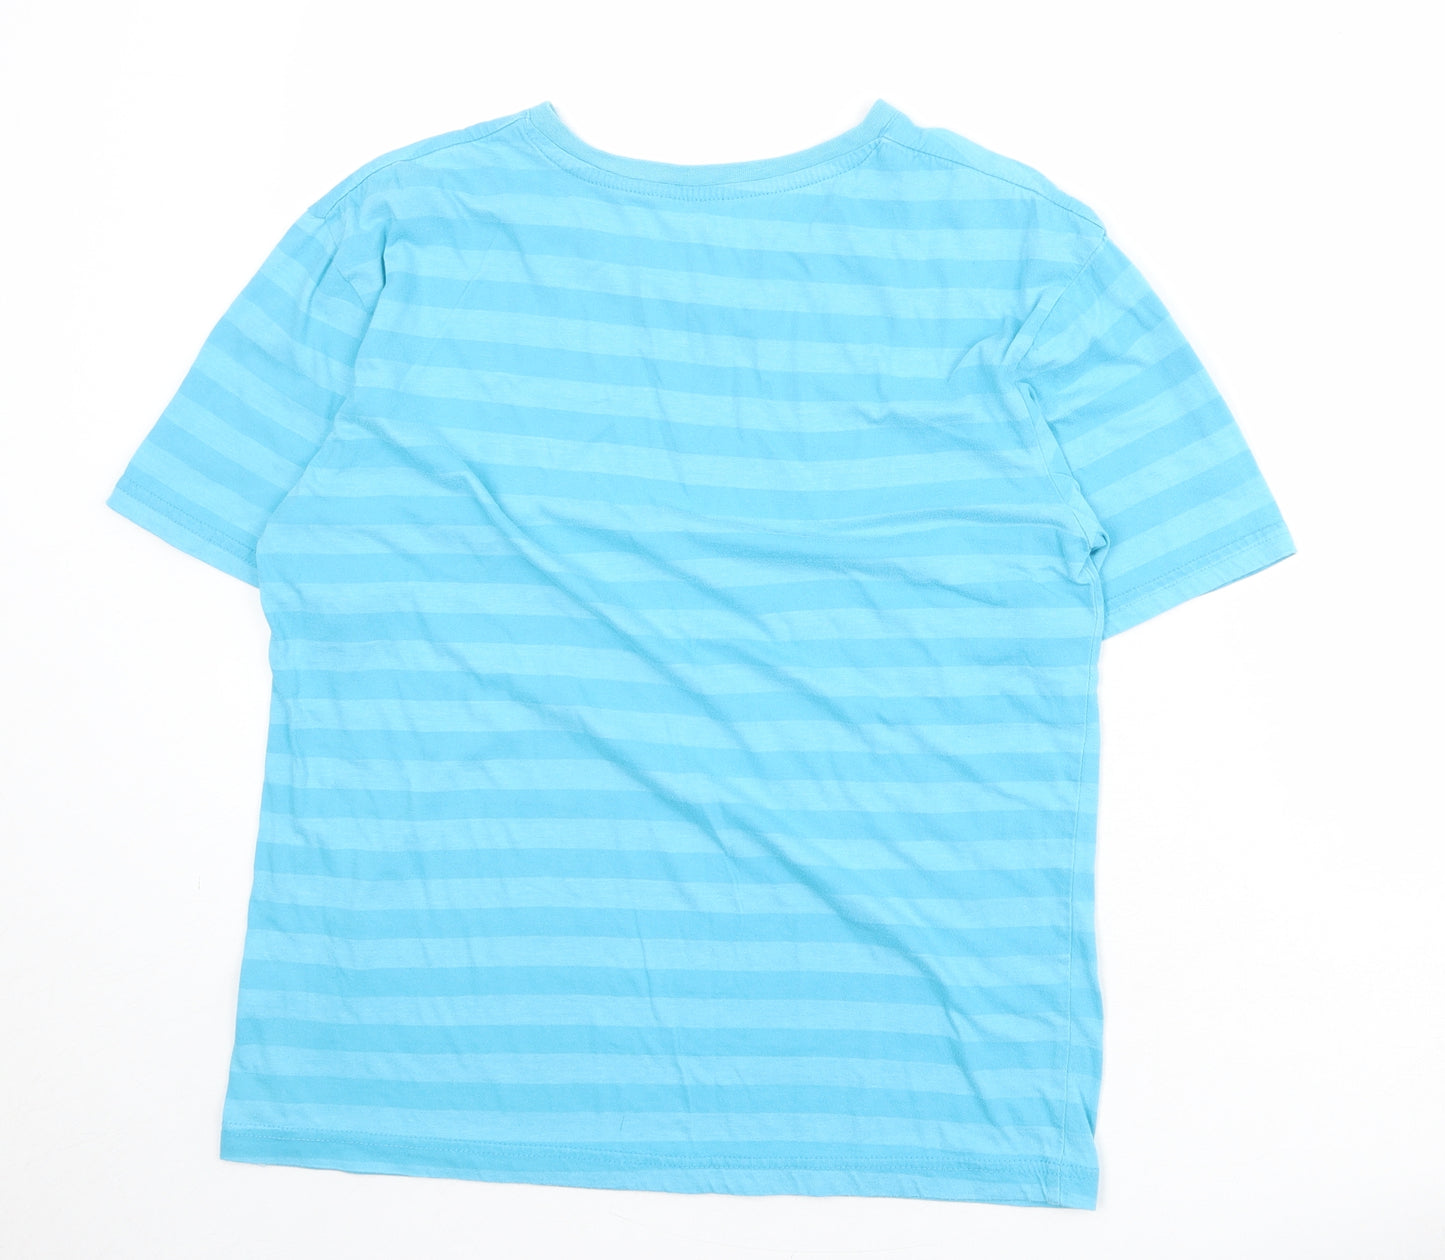 Lee Cooper Boys Blue Striped Cotton Basic T-Shirt Size 13 Years V-Neck Pullover